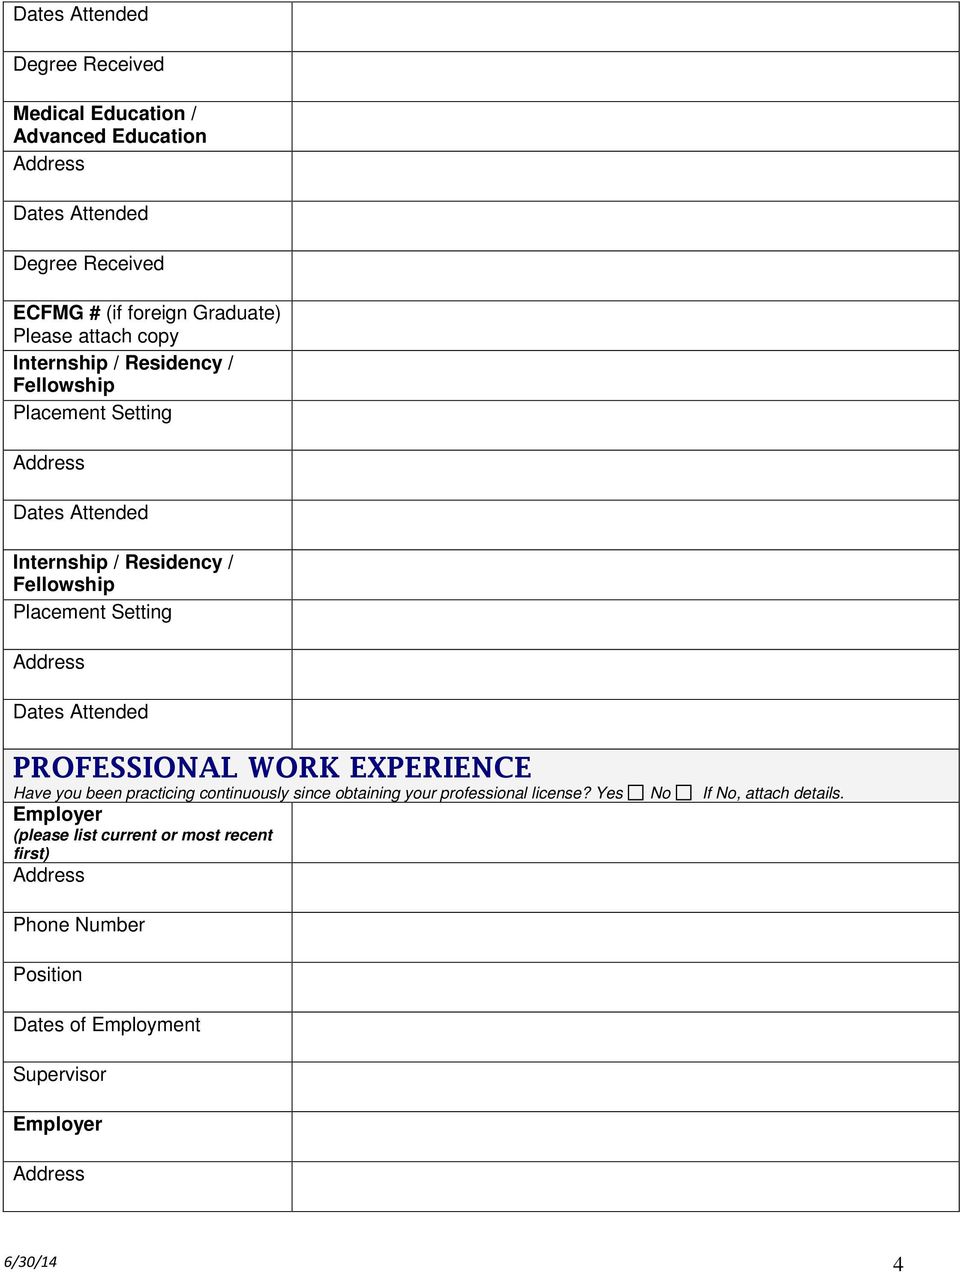 Dates Attended PROFESSIONAL WORK EXPERIENCE Have you been practicing continuously since obtaining your professional license?